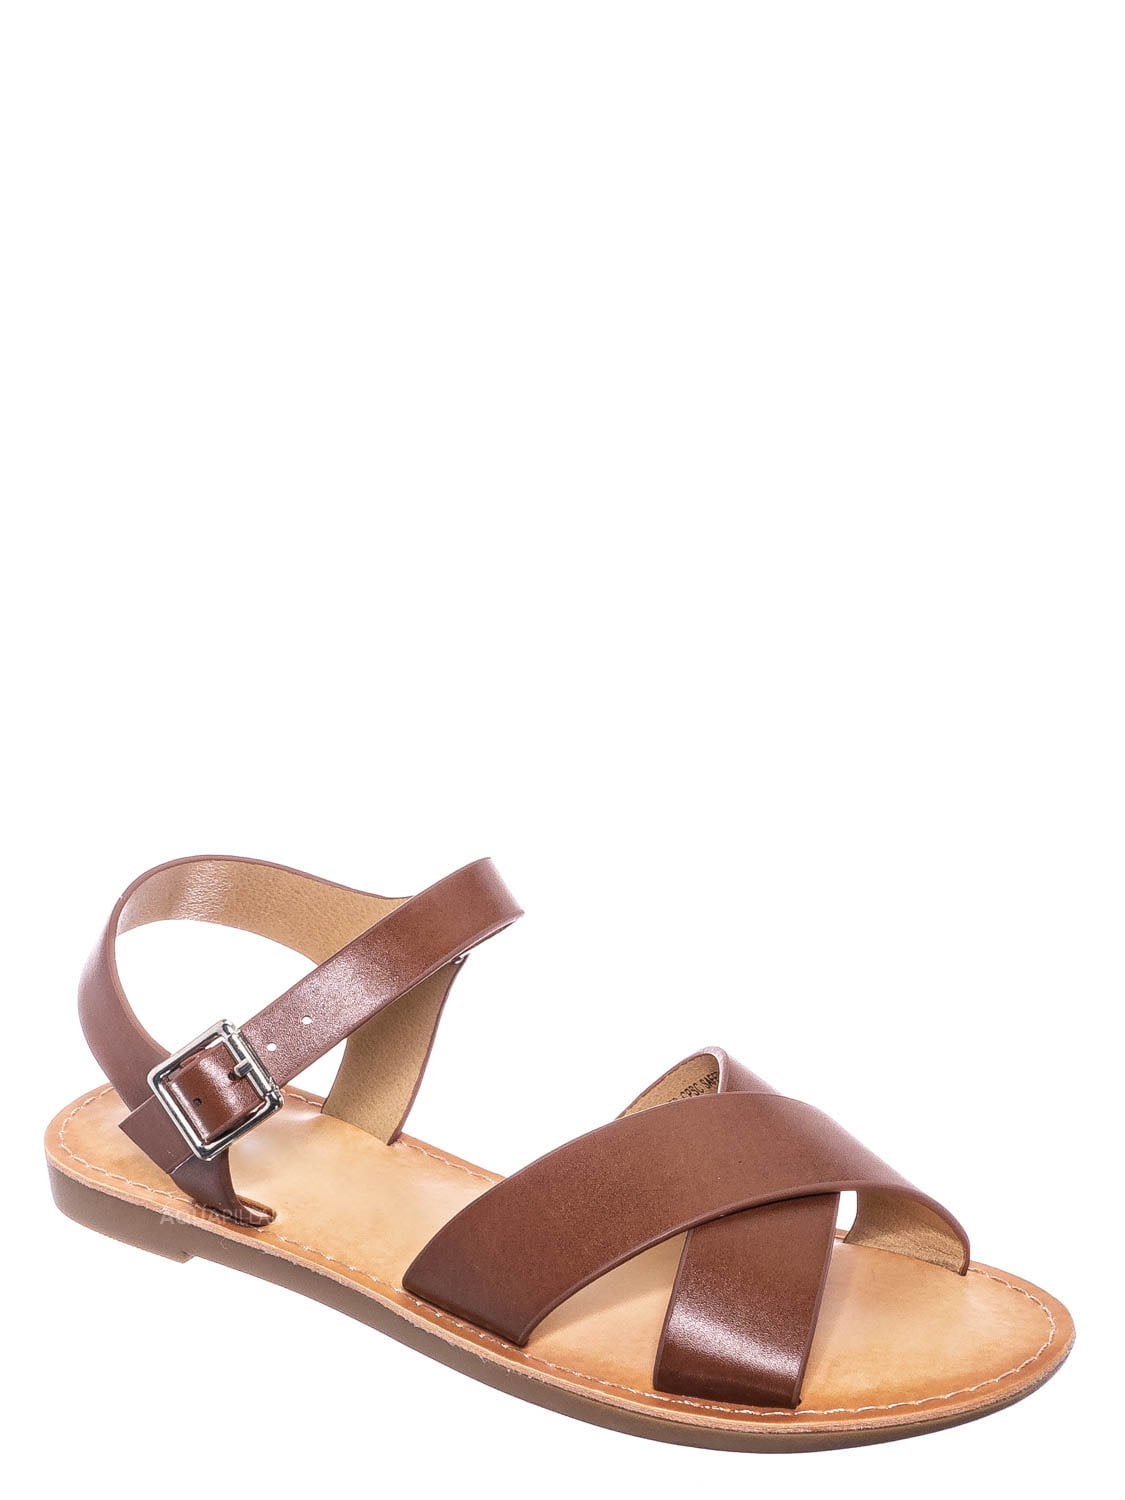 open toe flat sandals with ankle strap